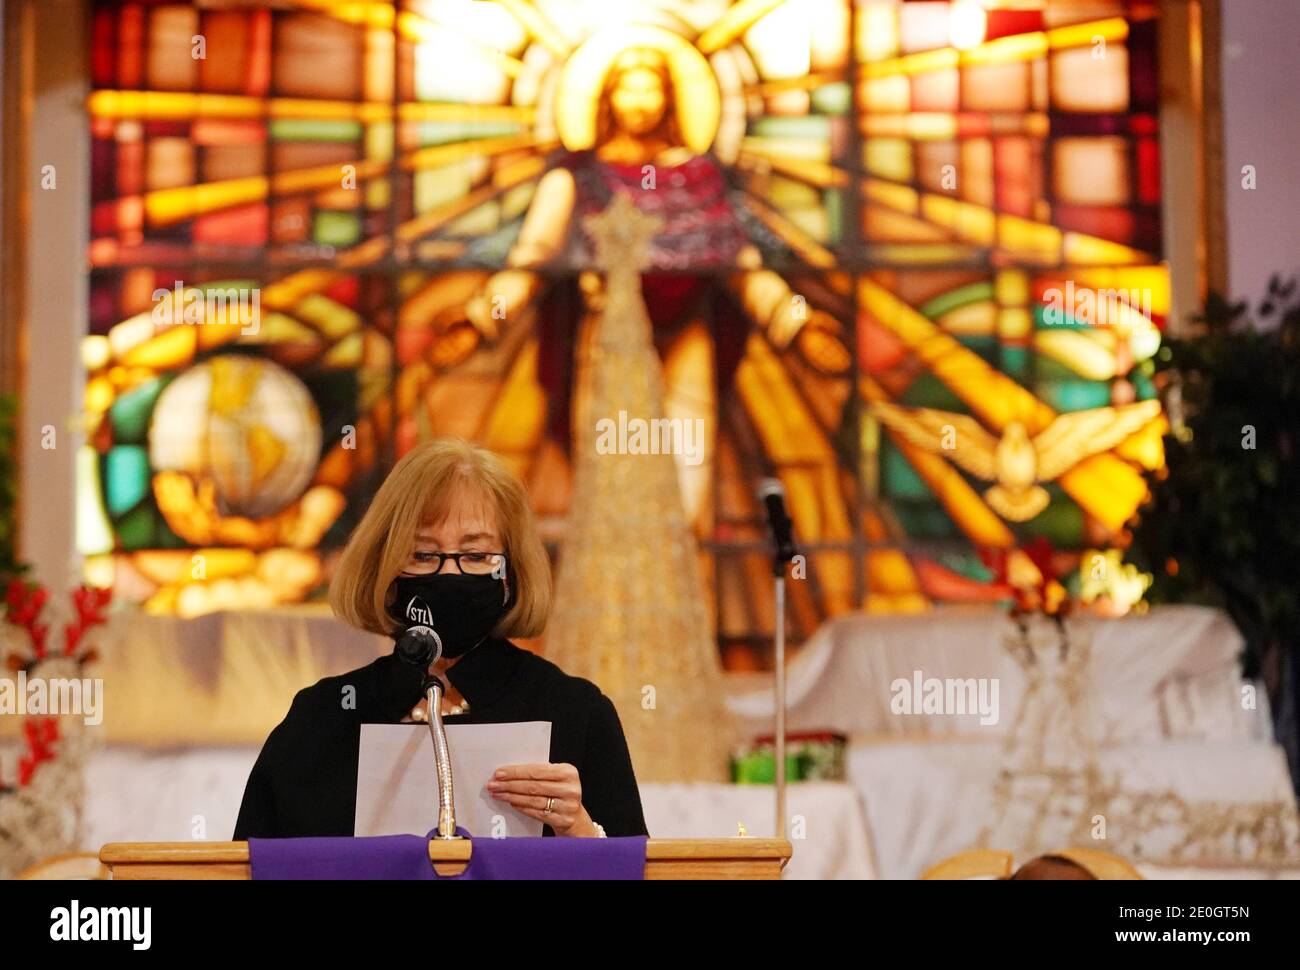 St. Louis, United States. 31st Dec, 2020. St. Louis Mayor Lyda Krewson reads the names of the dead, during a New Year's Eve Candlelight Service commemorating those who lost their lives to violence in 2020, at the Williams Temple on Thursday, December 31, 2020.The St. Louis homicide rate in 2020 reached 262 the highest since 1993. In 1993, St. Louis suffered its deadliest year when there were 267 victims of homicides. Photo by Bill Greenblatt/UPI Credit: UPI/Alamy Live News Stock Photo